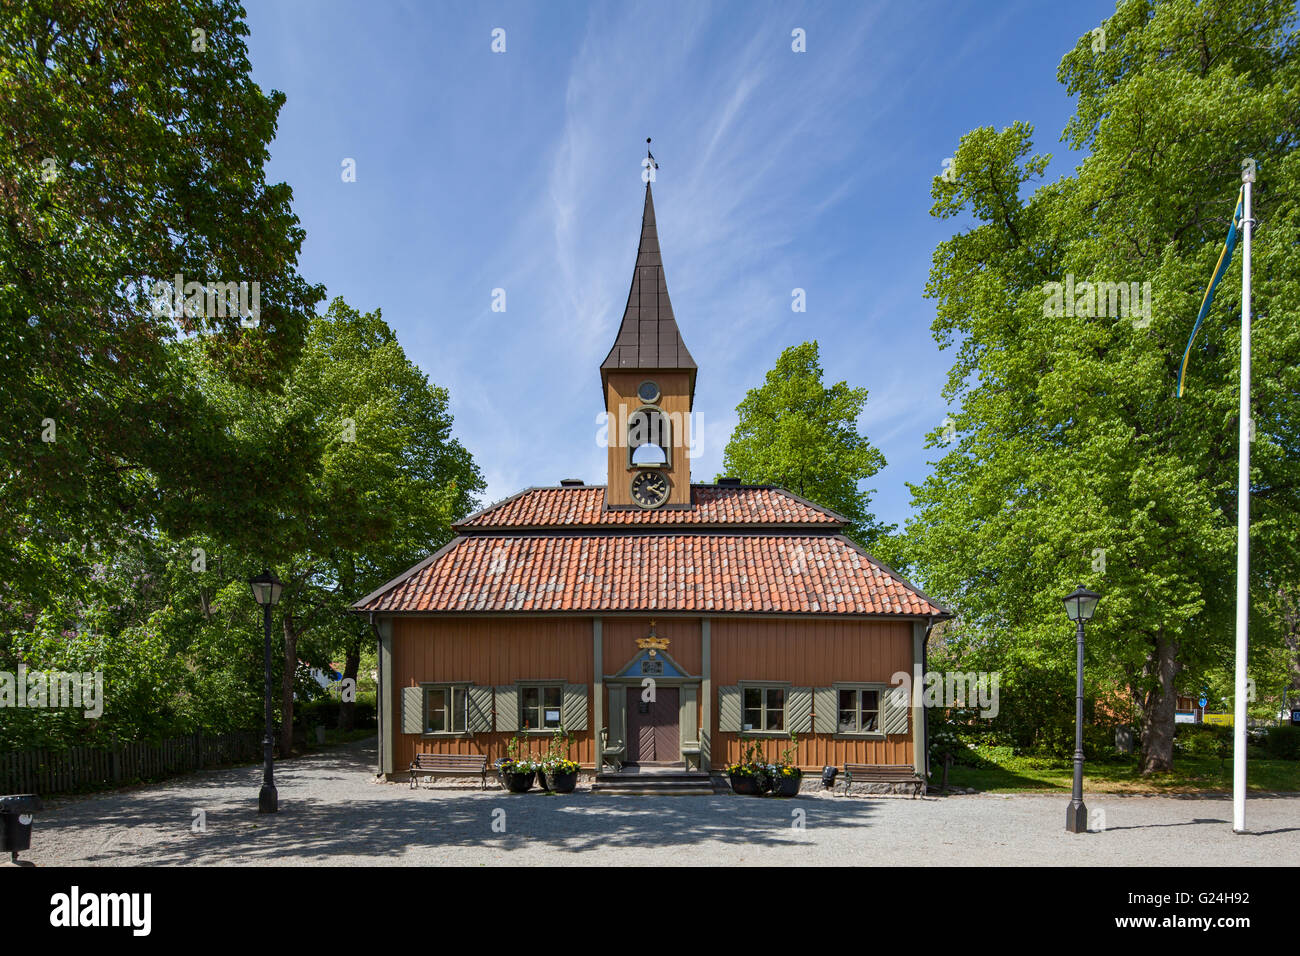 Front view of the Old town hall of Sigtuna, Stockholm, Sweden Stock Photo